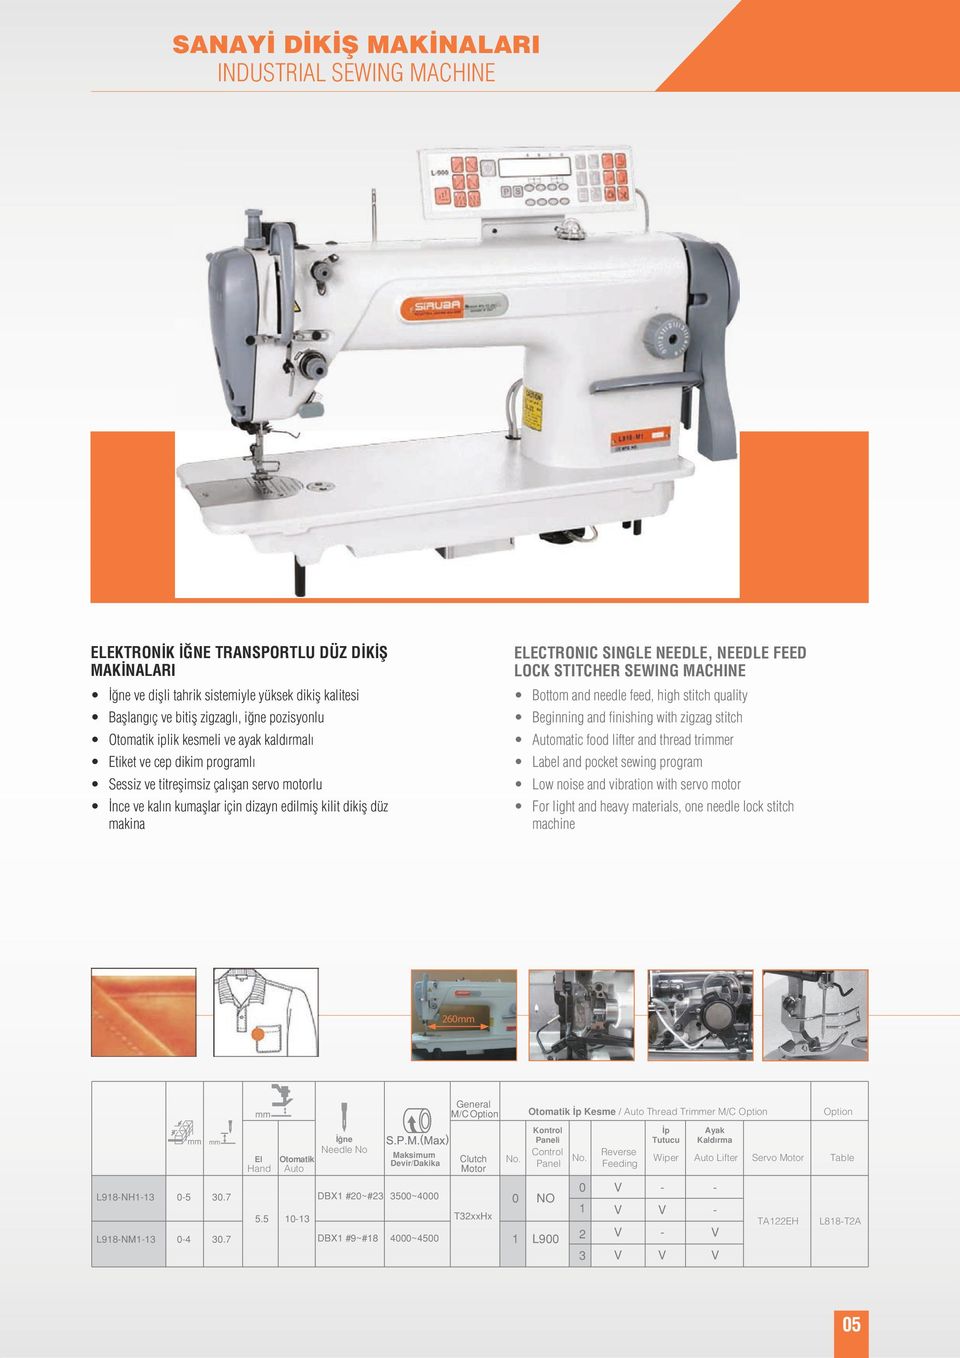 MACHINE Bottom and needle feed, high stitch quality Beginning and finishing with zigzag stitch Automatic food lifter and thread trimmer Label and pocket sewing program Low noise and vibration with